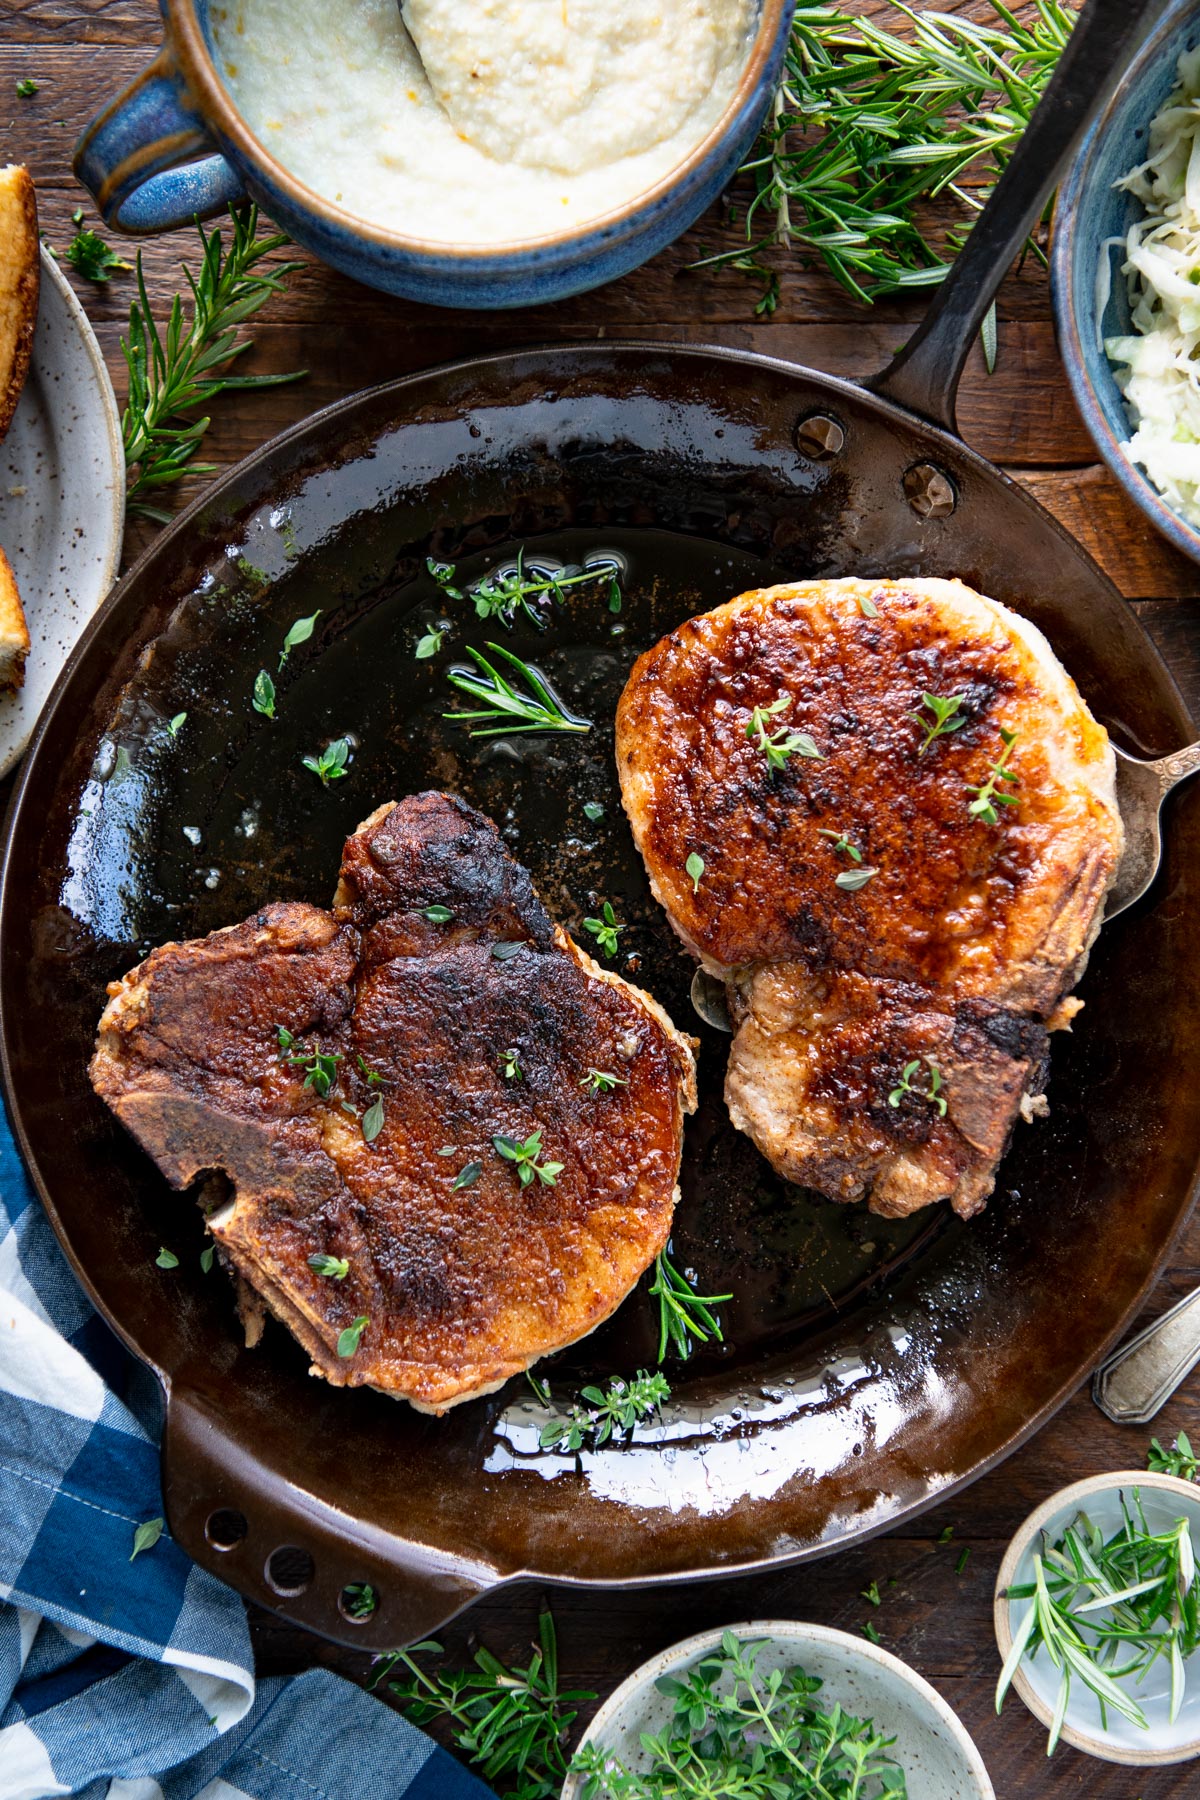 Skillet of Creole pork chops with fresh herbs for garnish.